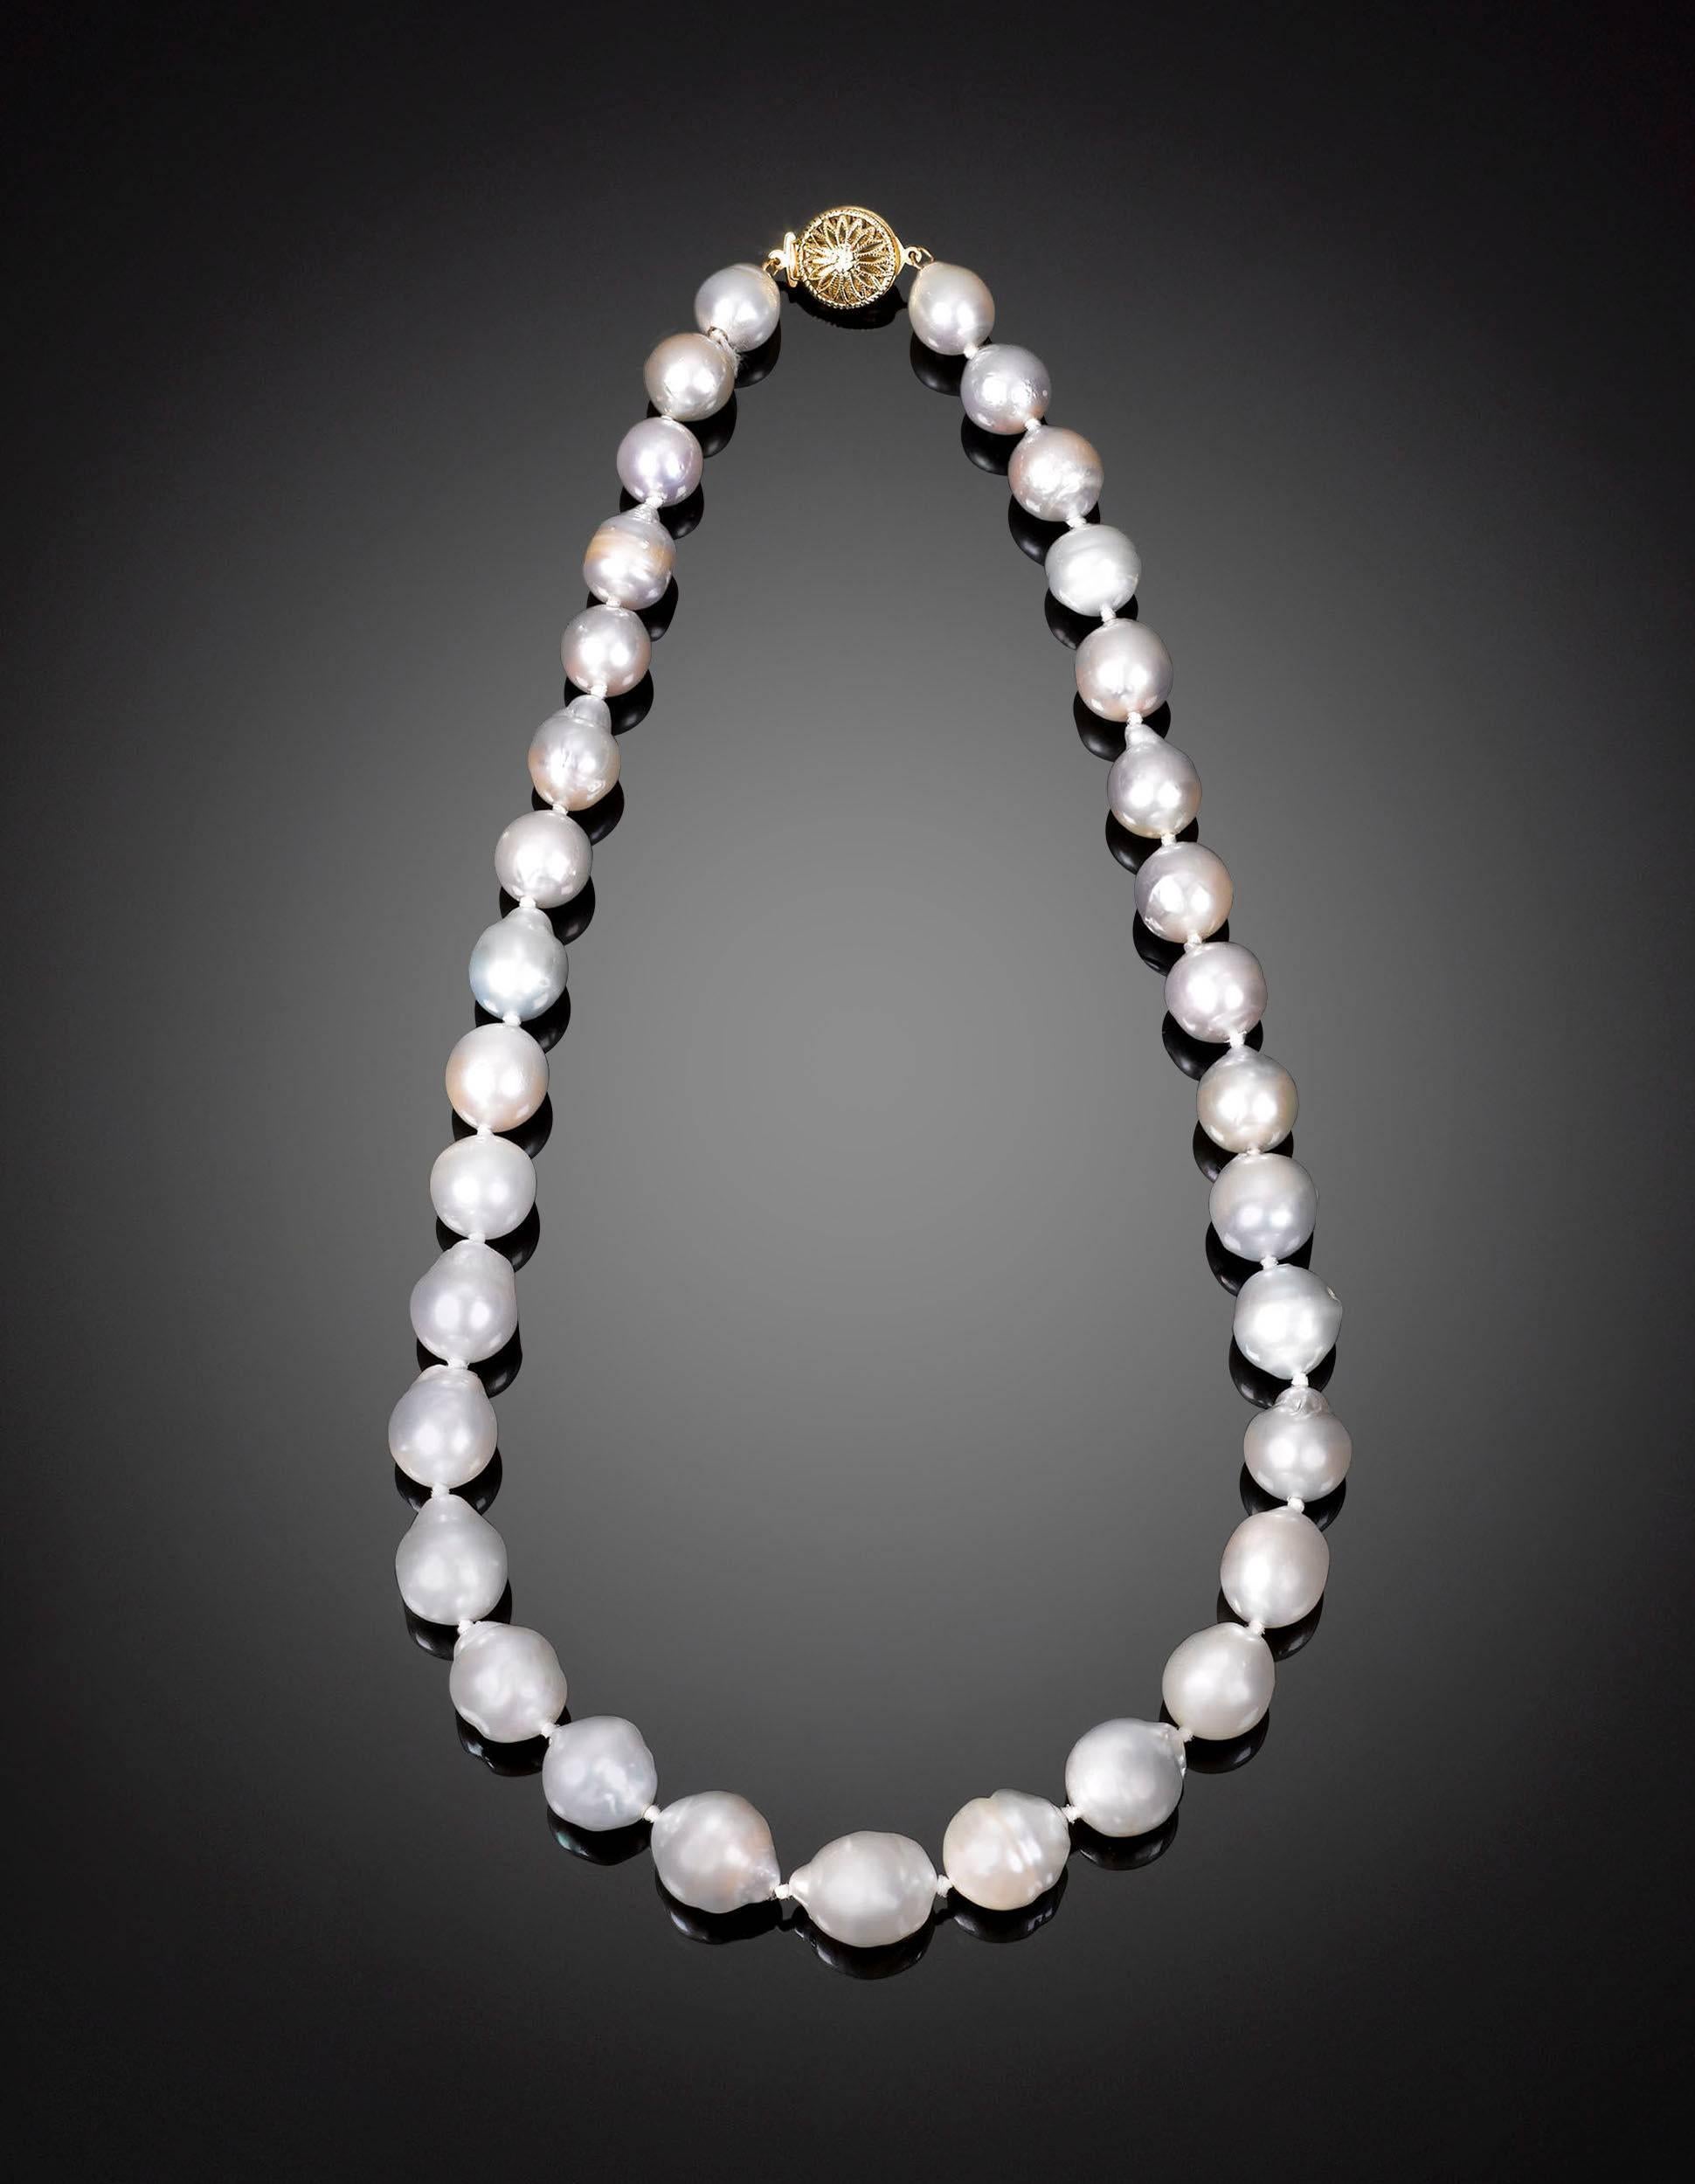 This captivating necklace is comprised of 33 peerless white Baroque South Sea pearls, graduating from 10mm-15mm in size. The pearls are further enhanced by the fine 14K yellow gold filigree clasp that secures the necklace. Harvested from the black